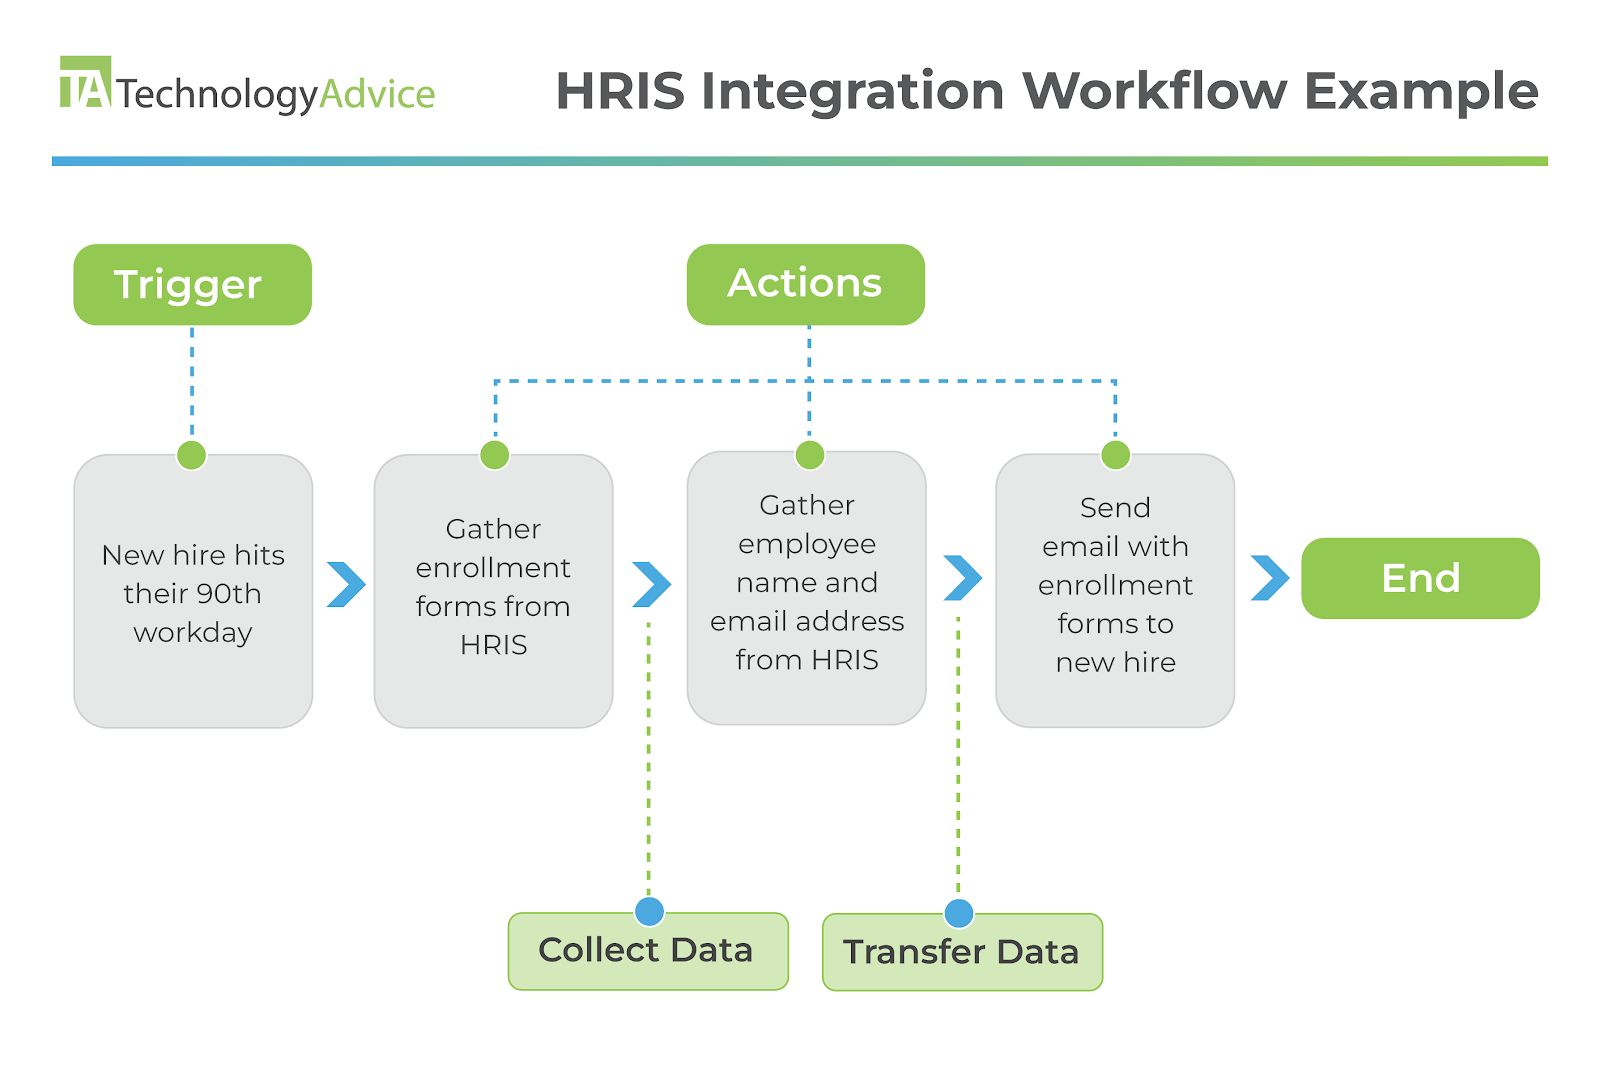 Workflow illustration of an HRIS integration. This example illustrates the protocols that tell the HRIS to perform specific actions: collect data (benefits enrollment forms and employee contact information) and transfer it to an email application following a trigger (the employee's 90th workday).